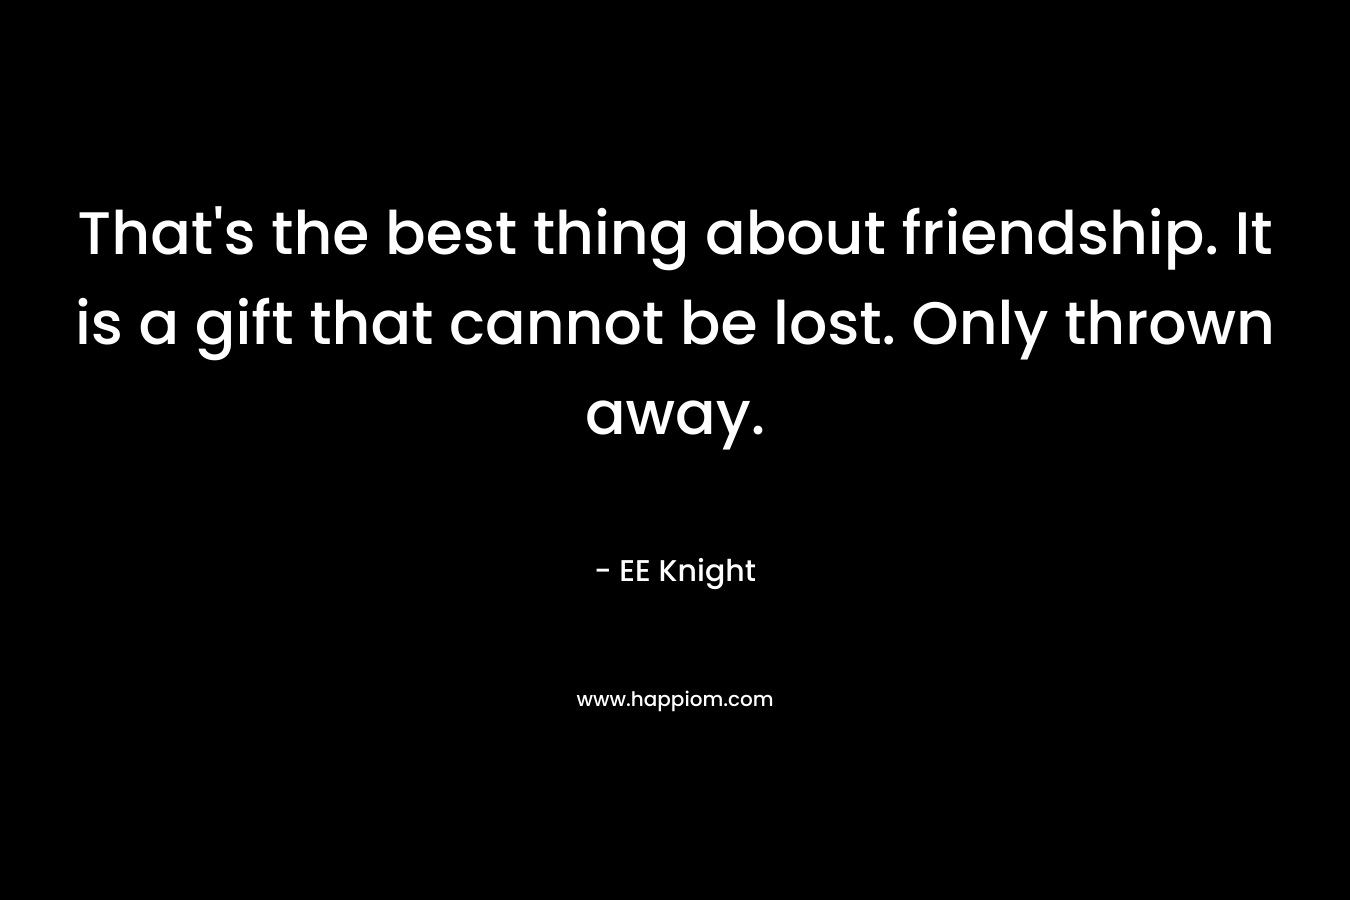 That’s the best thing about friendship. It is a gift that cannot be lost. Only thrown away. – EE Knight